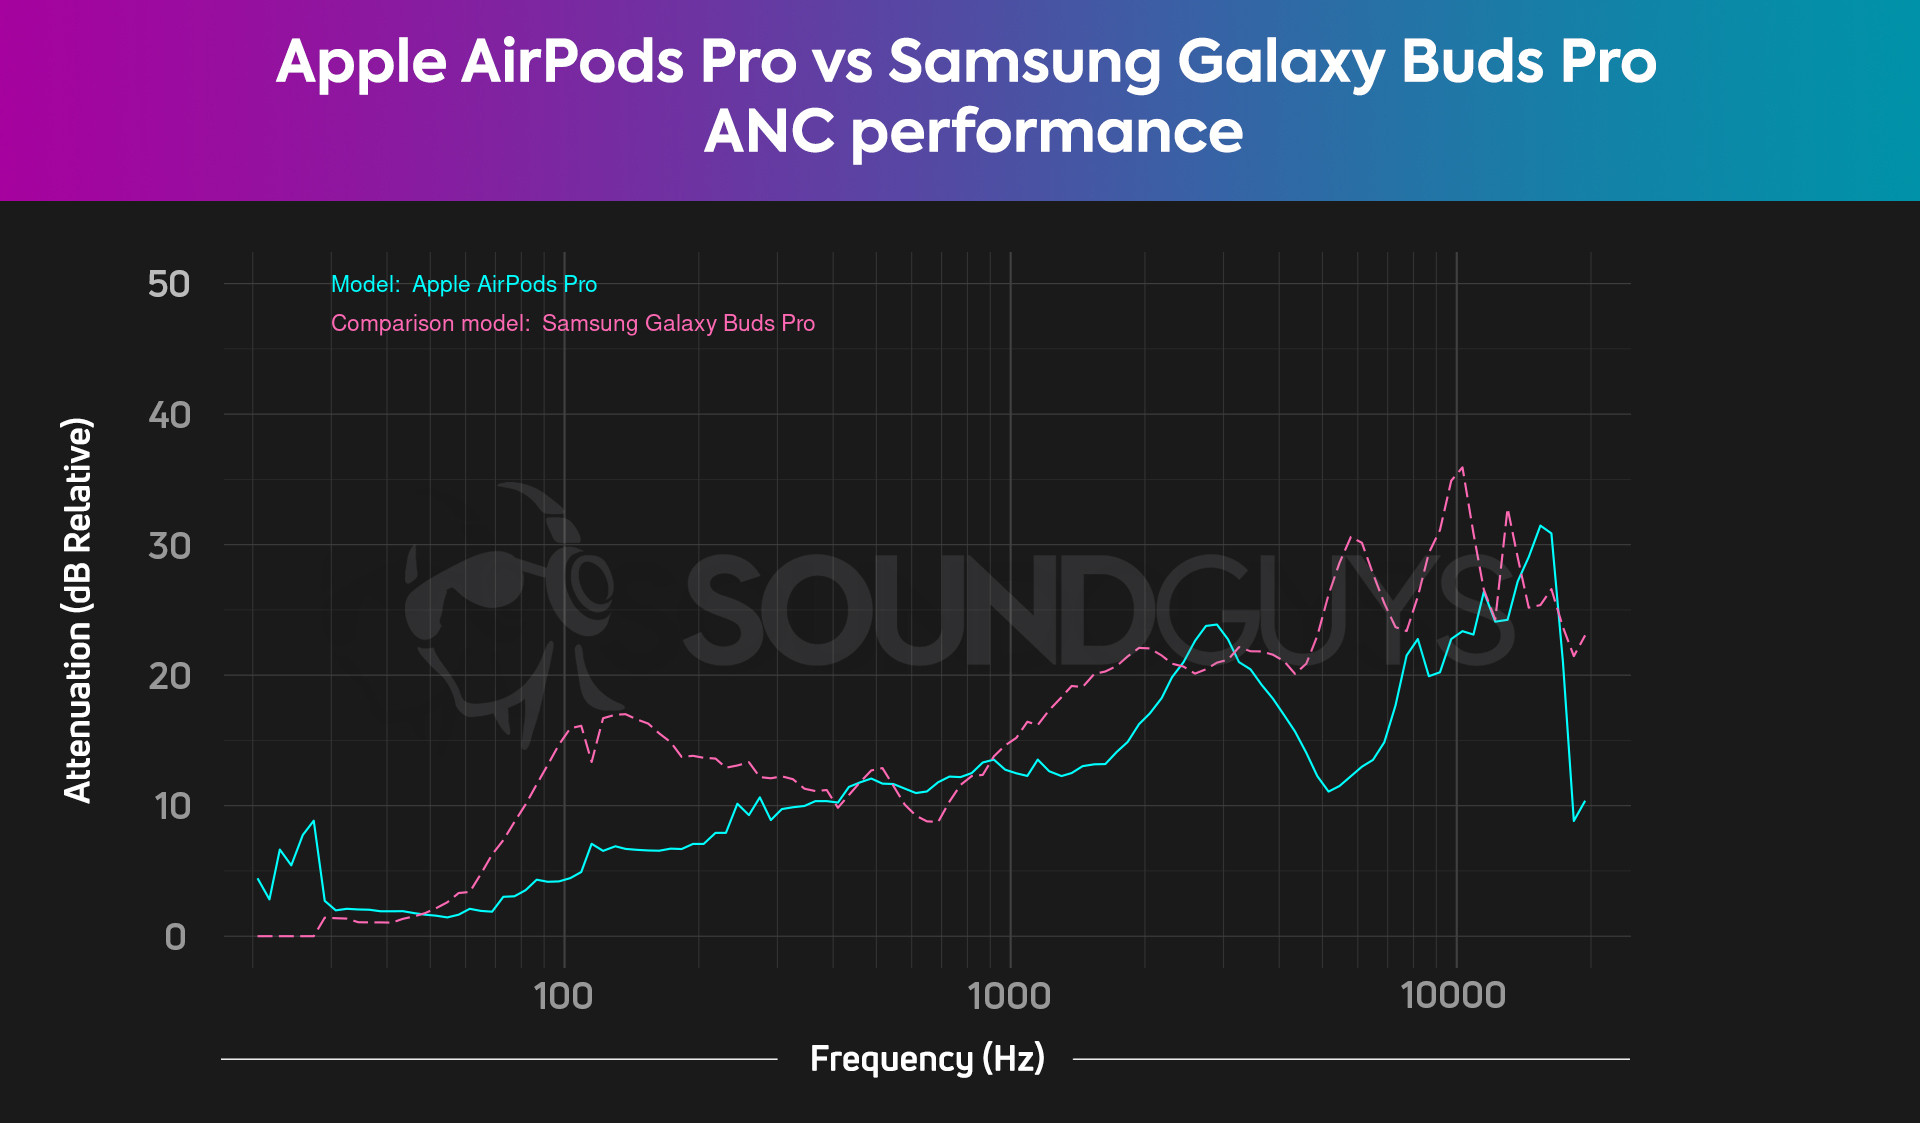 Apple AirPods Pro vs Samsung Galaxy Buds Pro ANC comparison. In general, the Samsung Galaxy Buds Pro does a better job of attenuating sound.